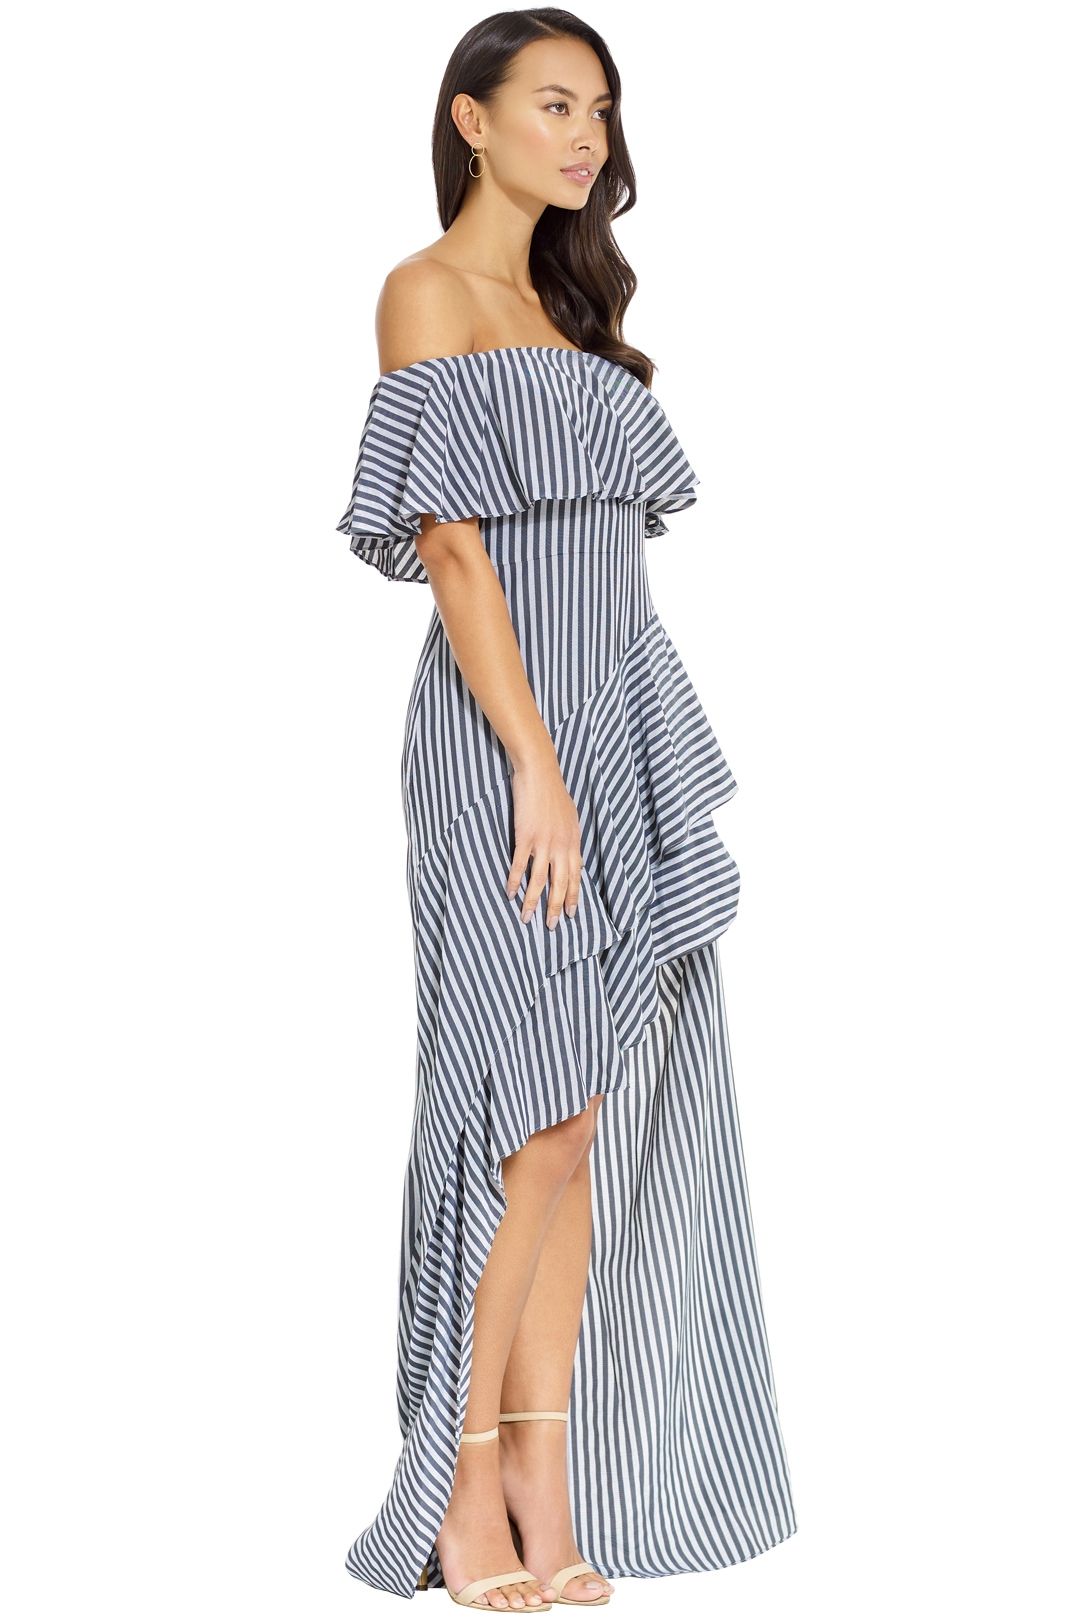 Halston Heritage - Striped off Shoulder Gown - Navy Charcoal - Side